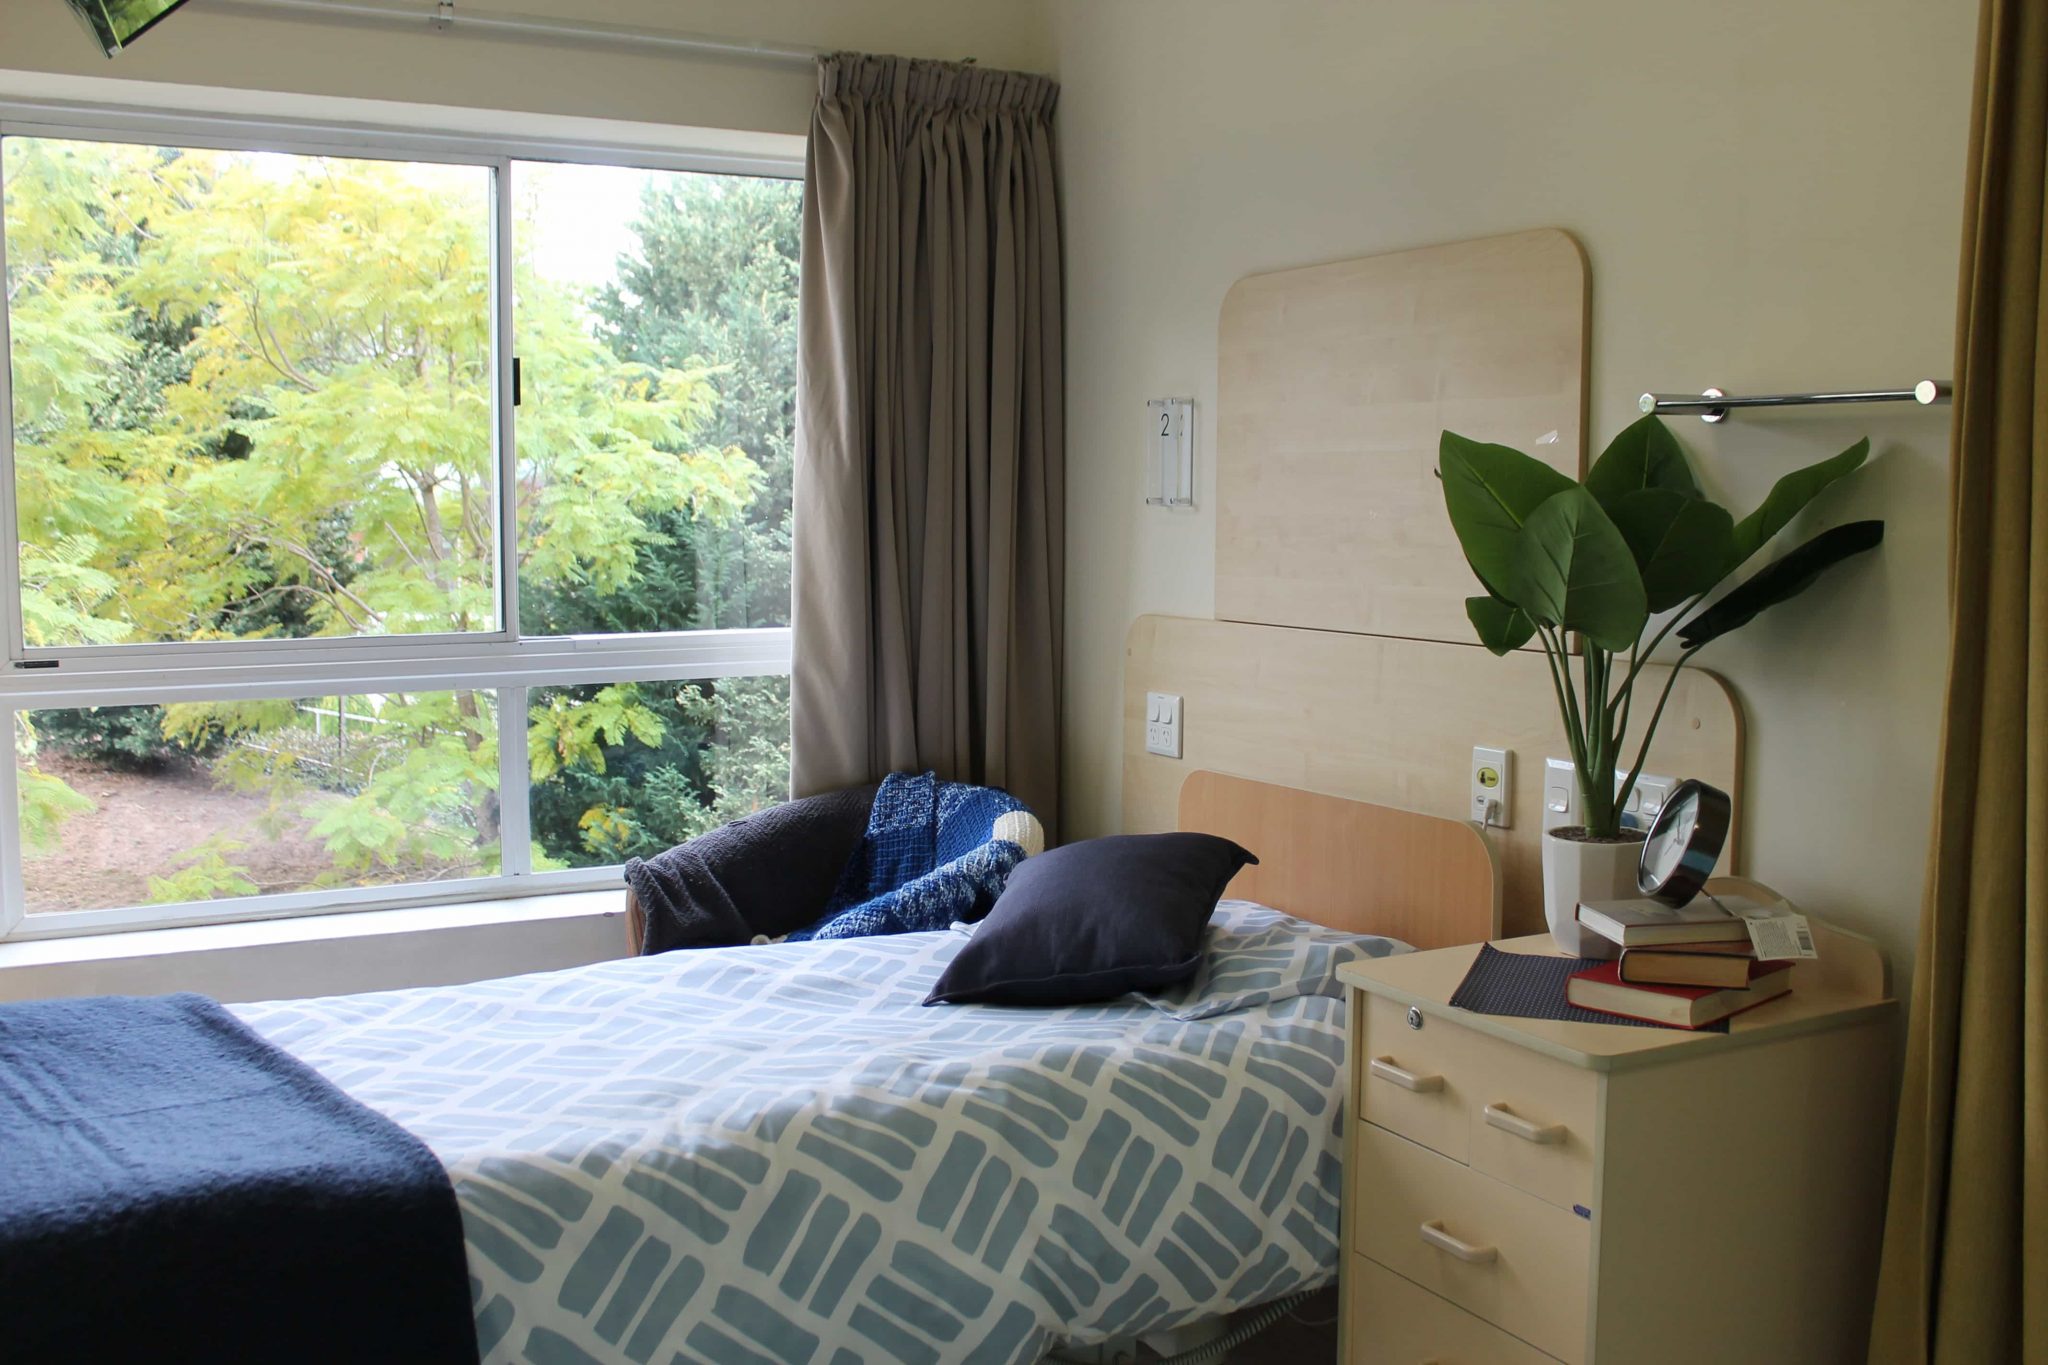 A single bedroom unit at Raines House in Whiddon Easton Park, with views of lush greenery.